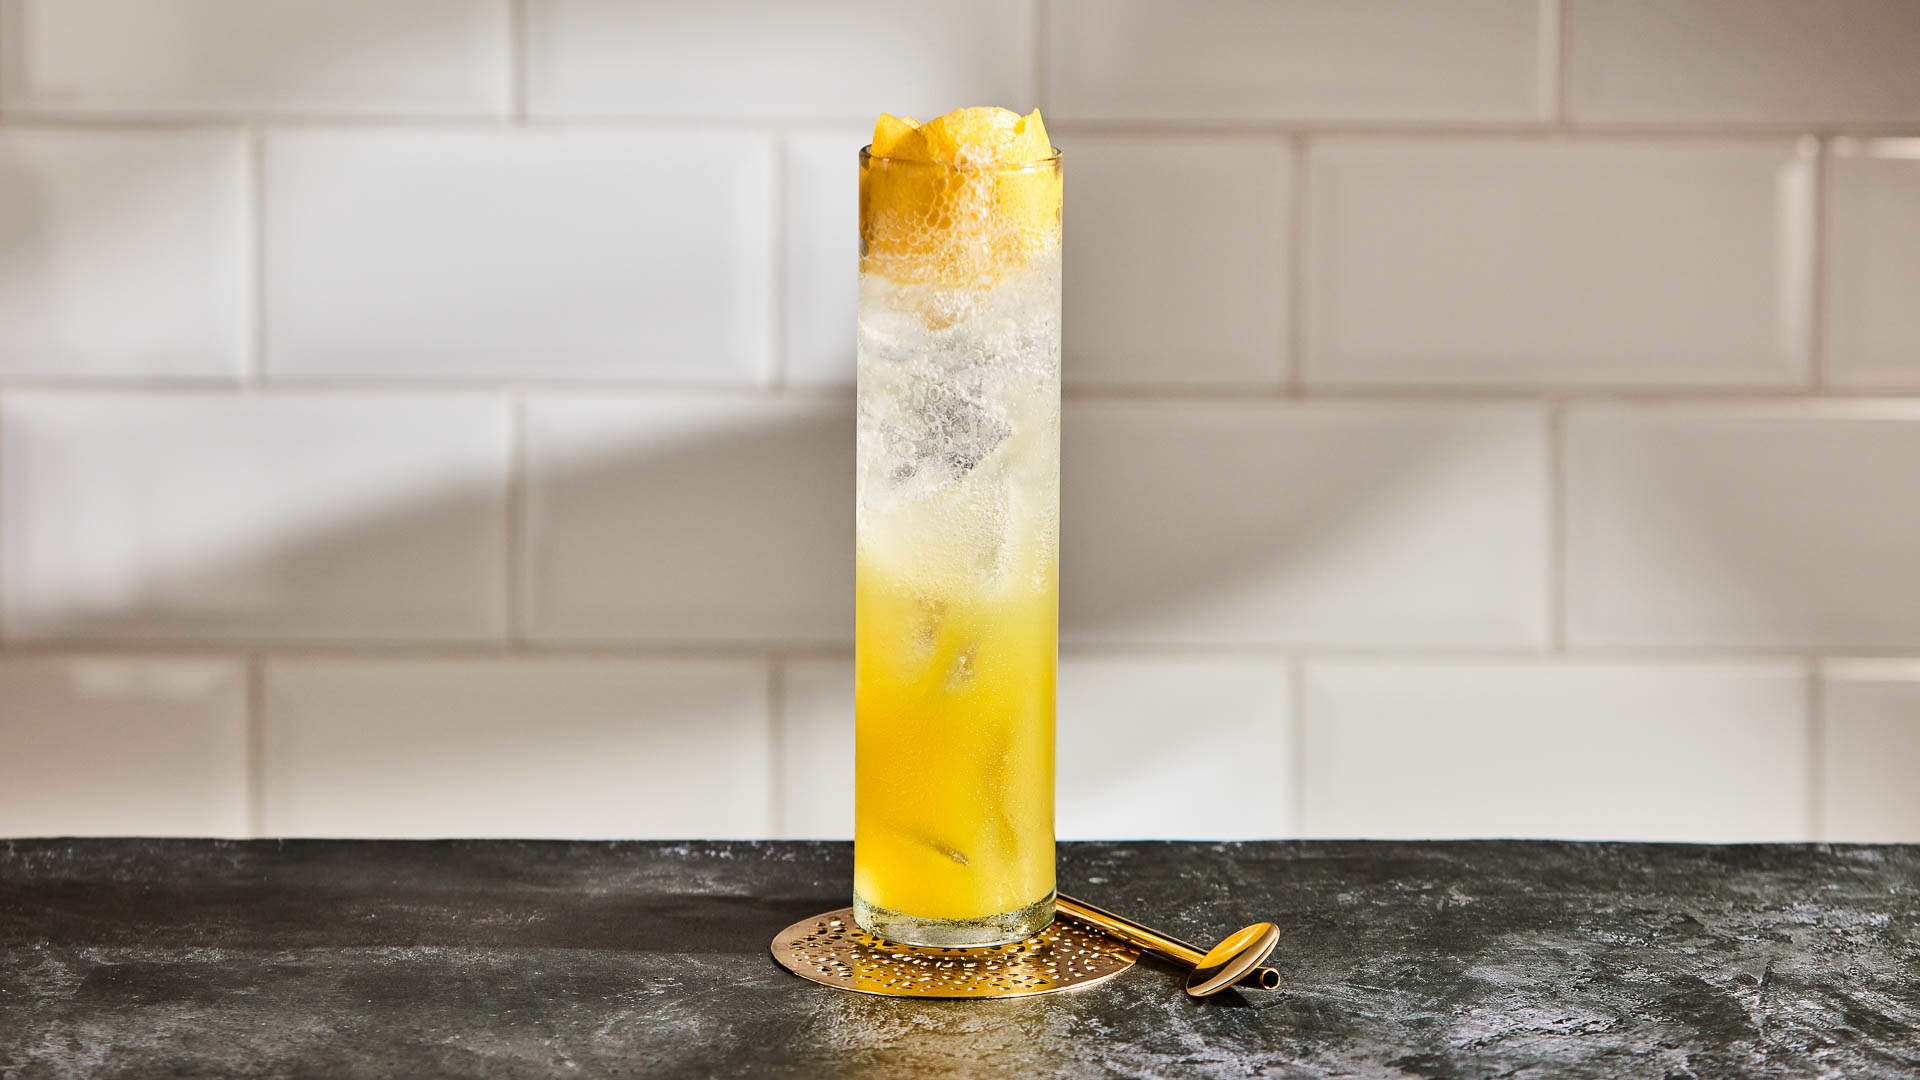 Cactus Pineapple Punch on a dark stone surface against a white tile wall